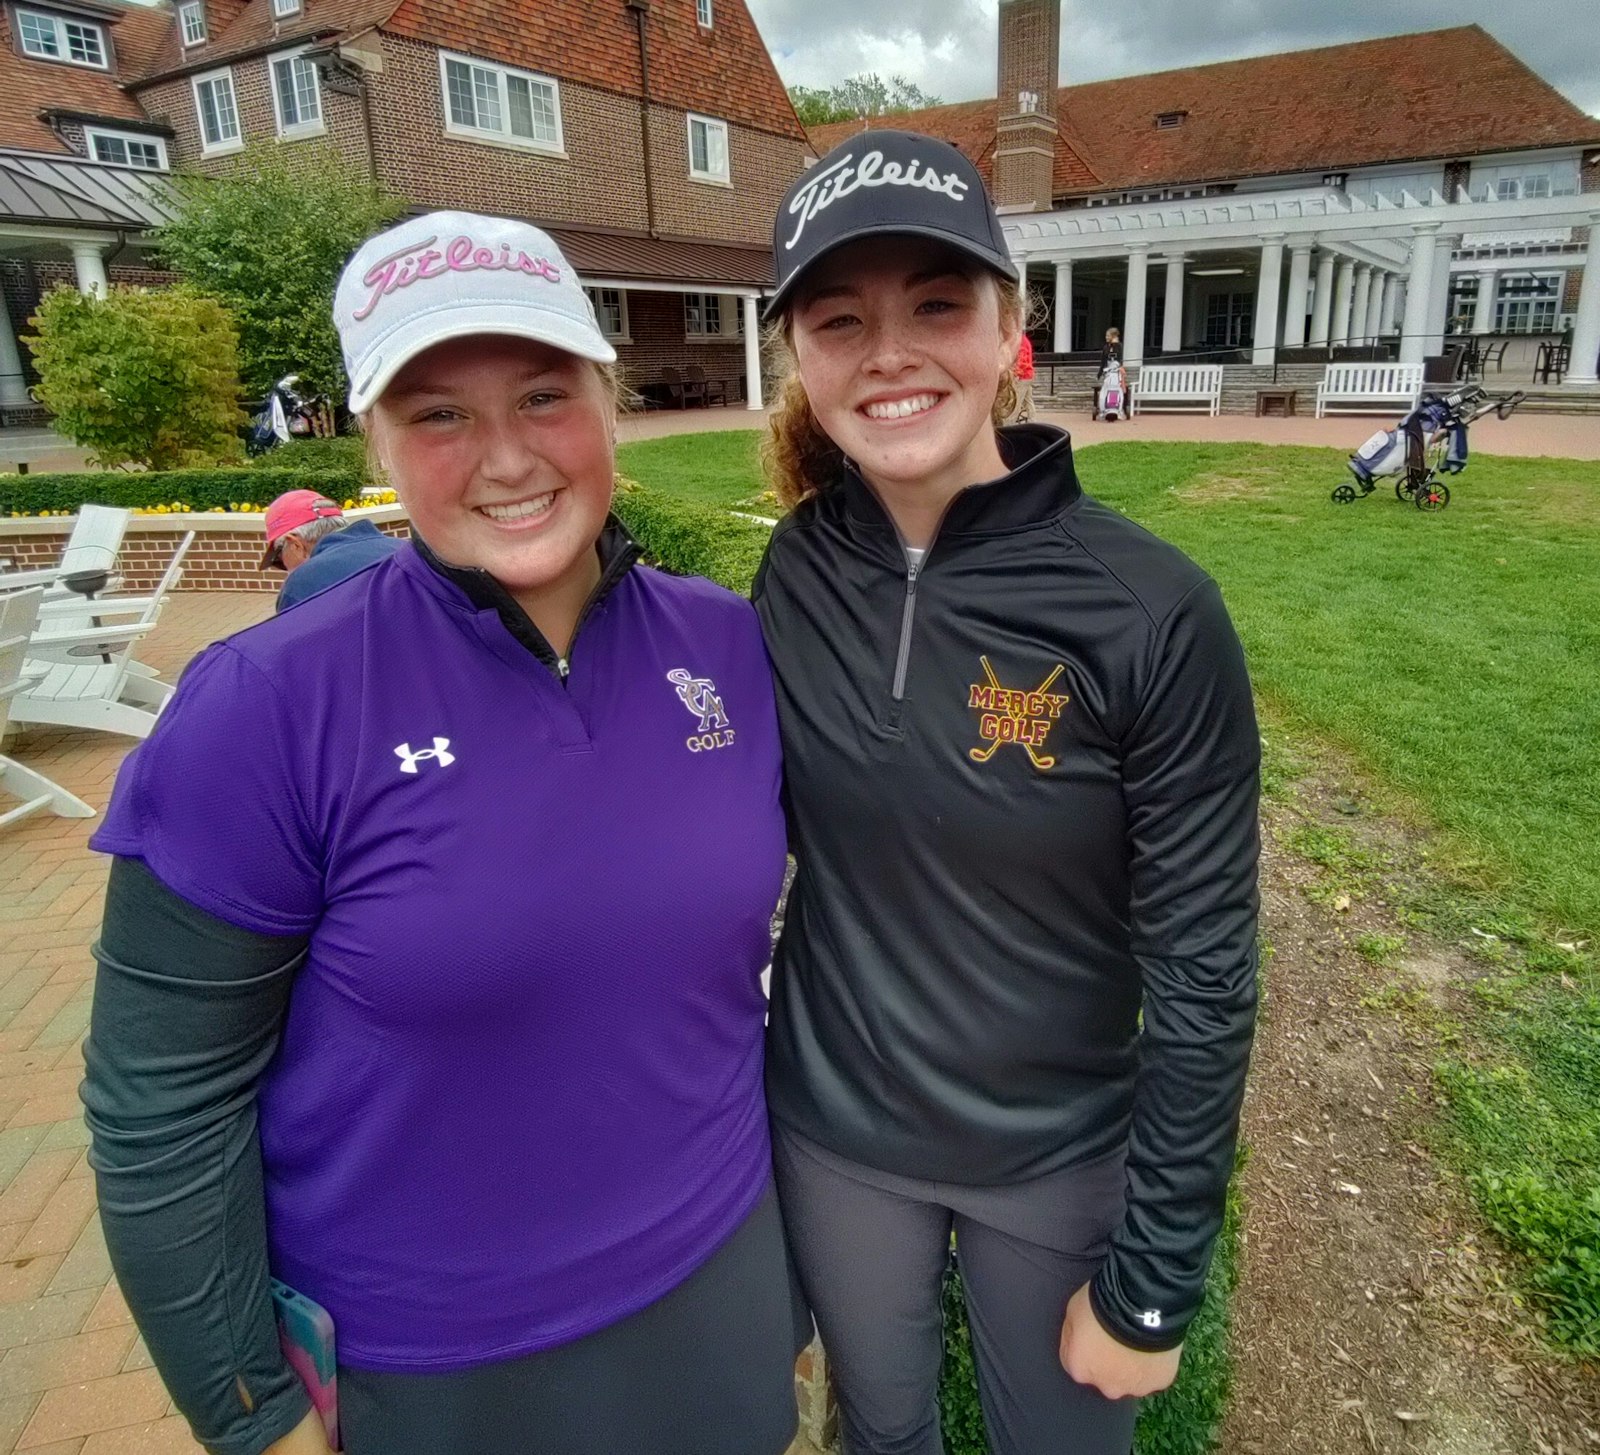 They’re both sophomores and they’re both 2022 CHSL girls golf medalists. Rachel Fay (left) shot a 72 on the Detroit Golf Club course to lead the Cardinal Division while Maeve Casey had a 1-over par 70 to top the Bishop Division.